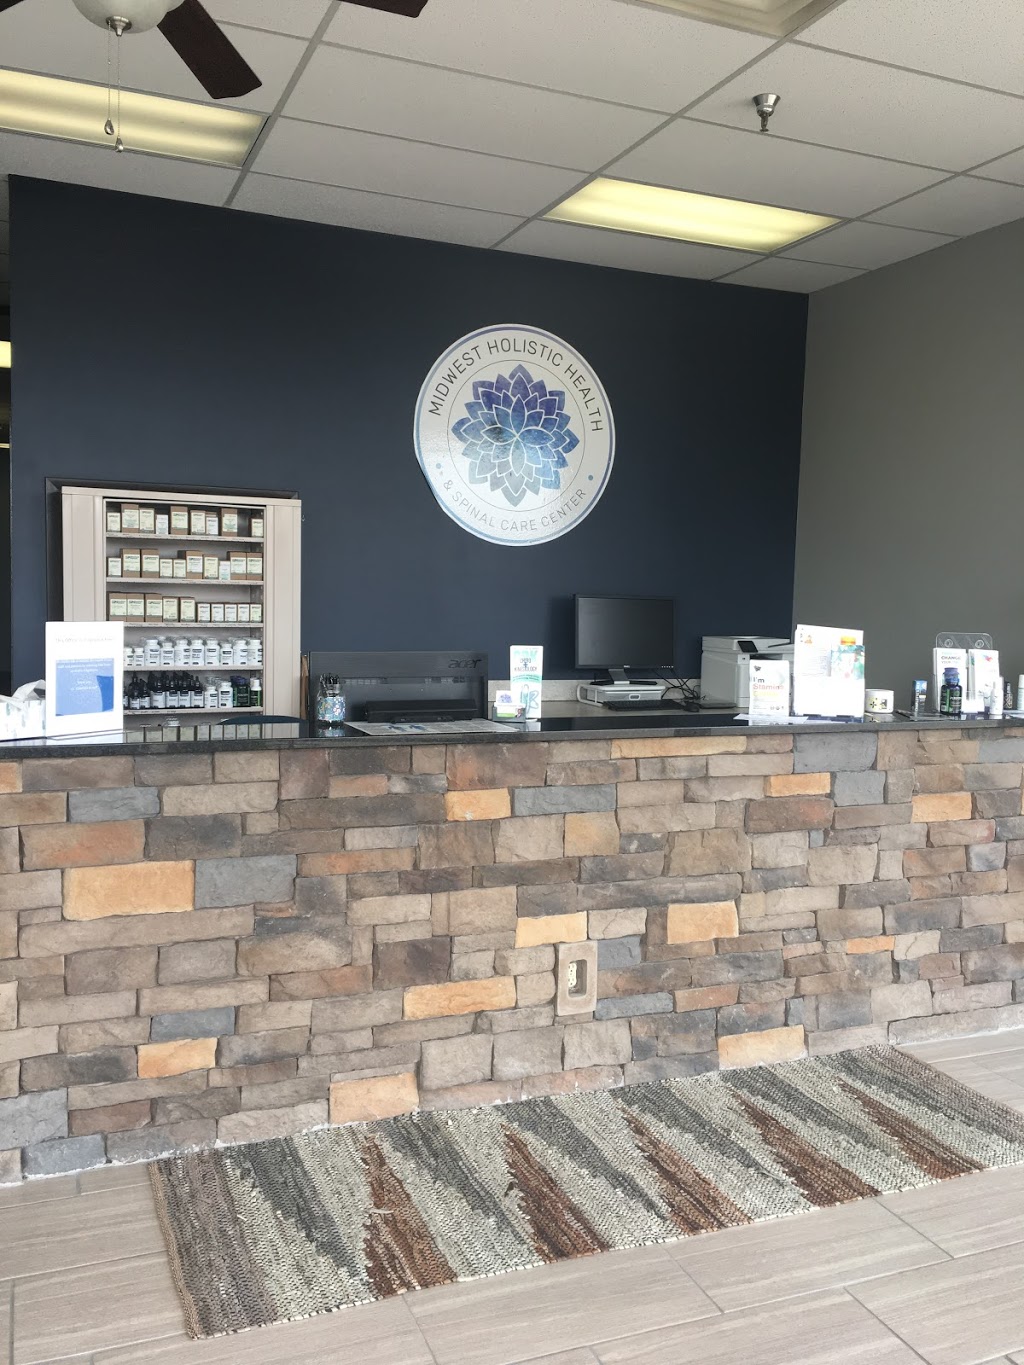 Midwest Holistic Health & Spinal Care Center | 8024 W 151st St, Overland Park, KS 66223 | Phone: (913) 744-2973